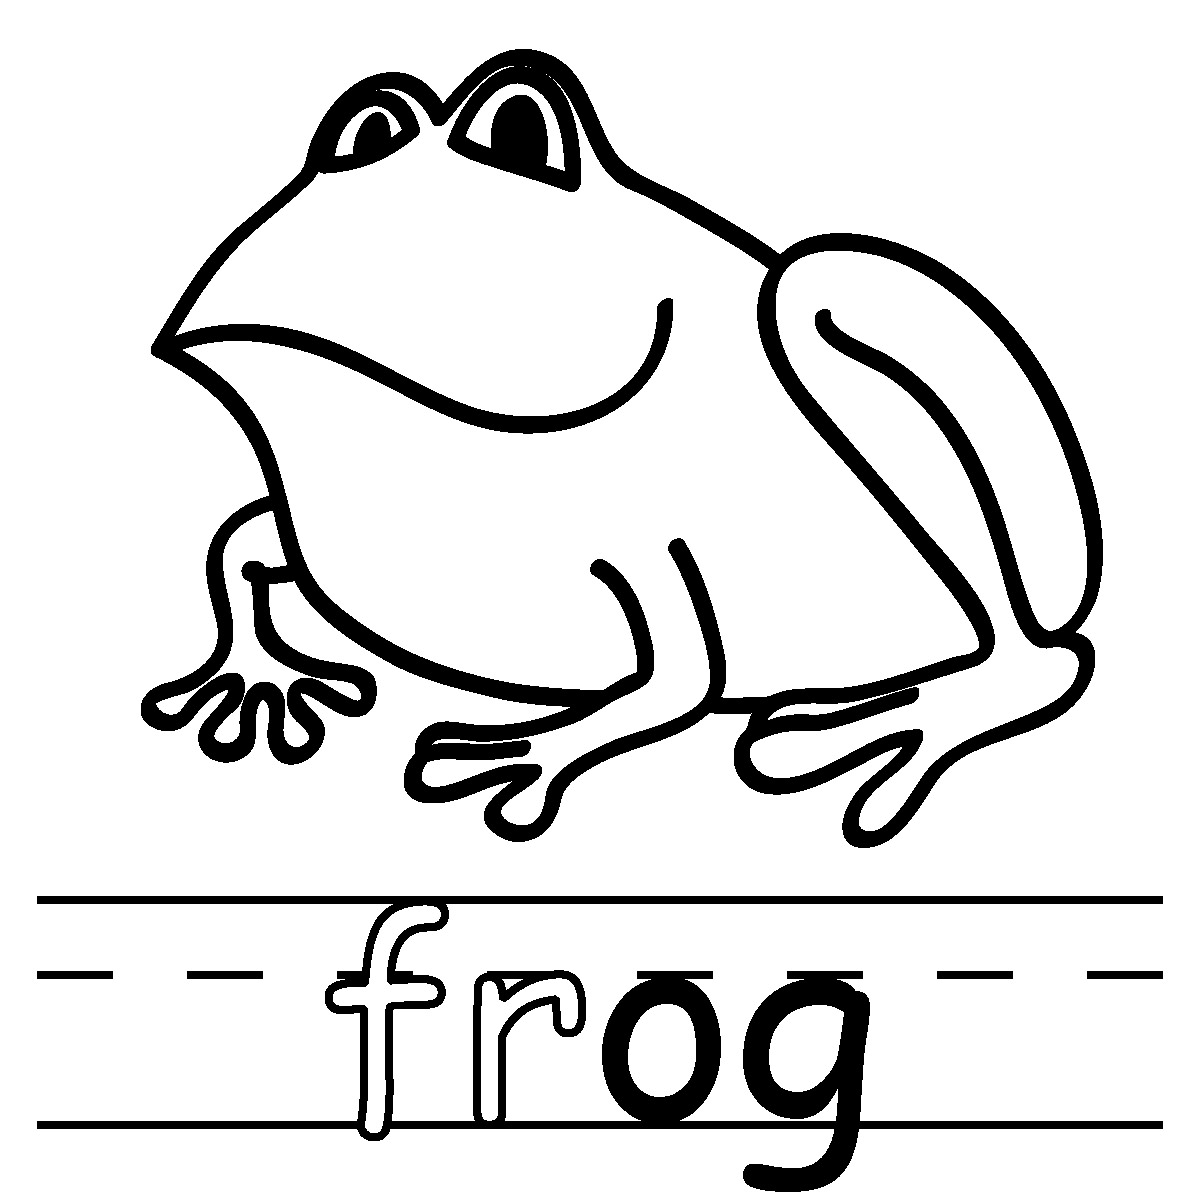 Frog Clip Art Black And White   Clipart Panda   Free Clipart Images